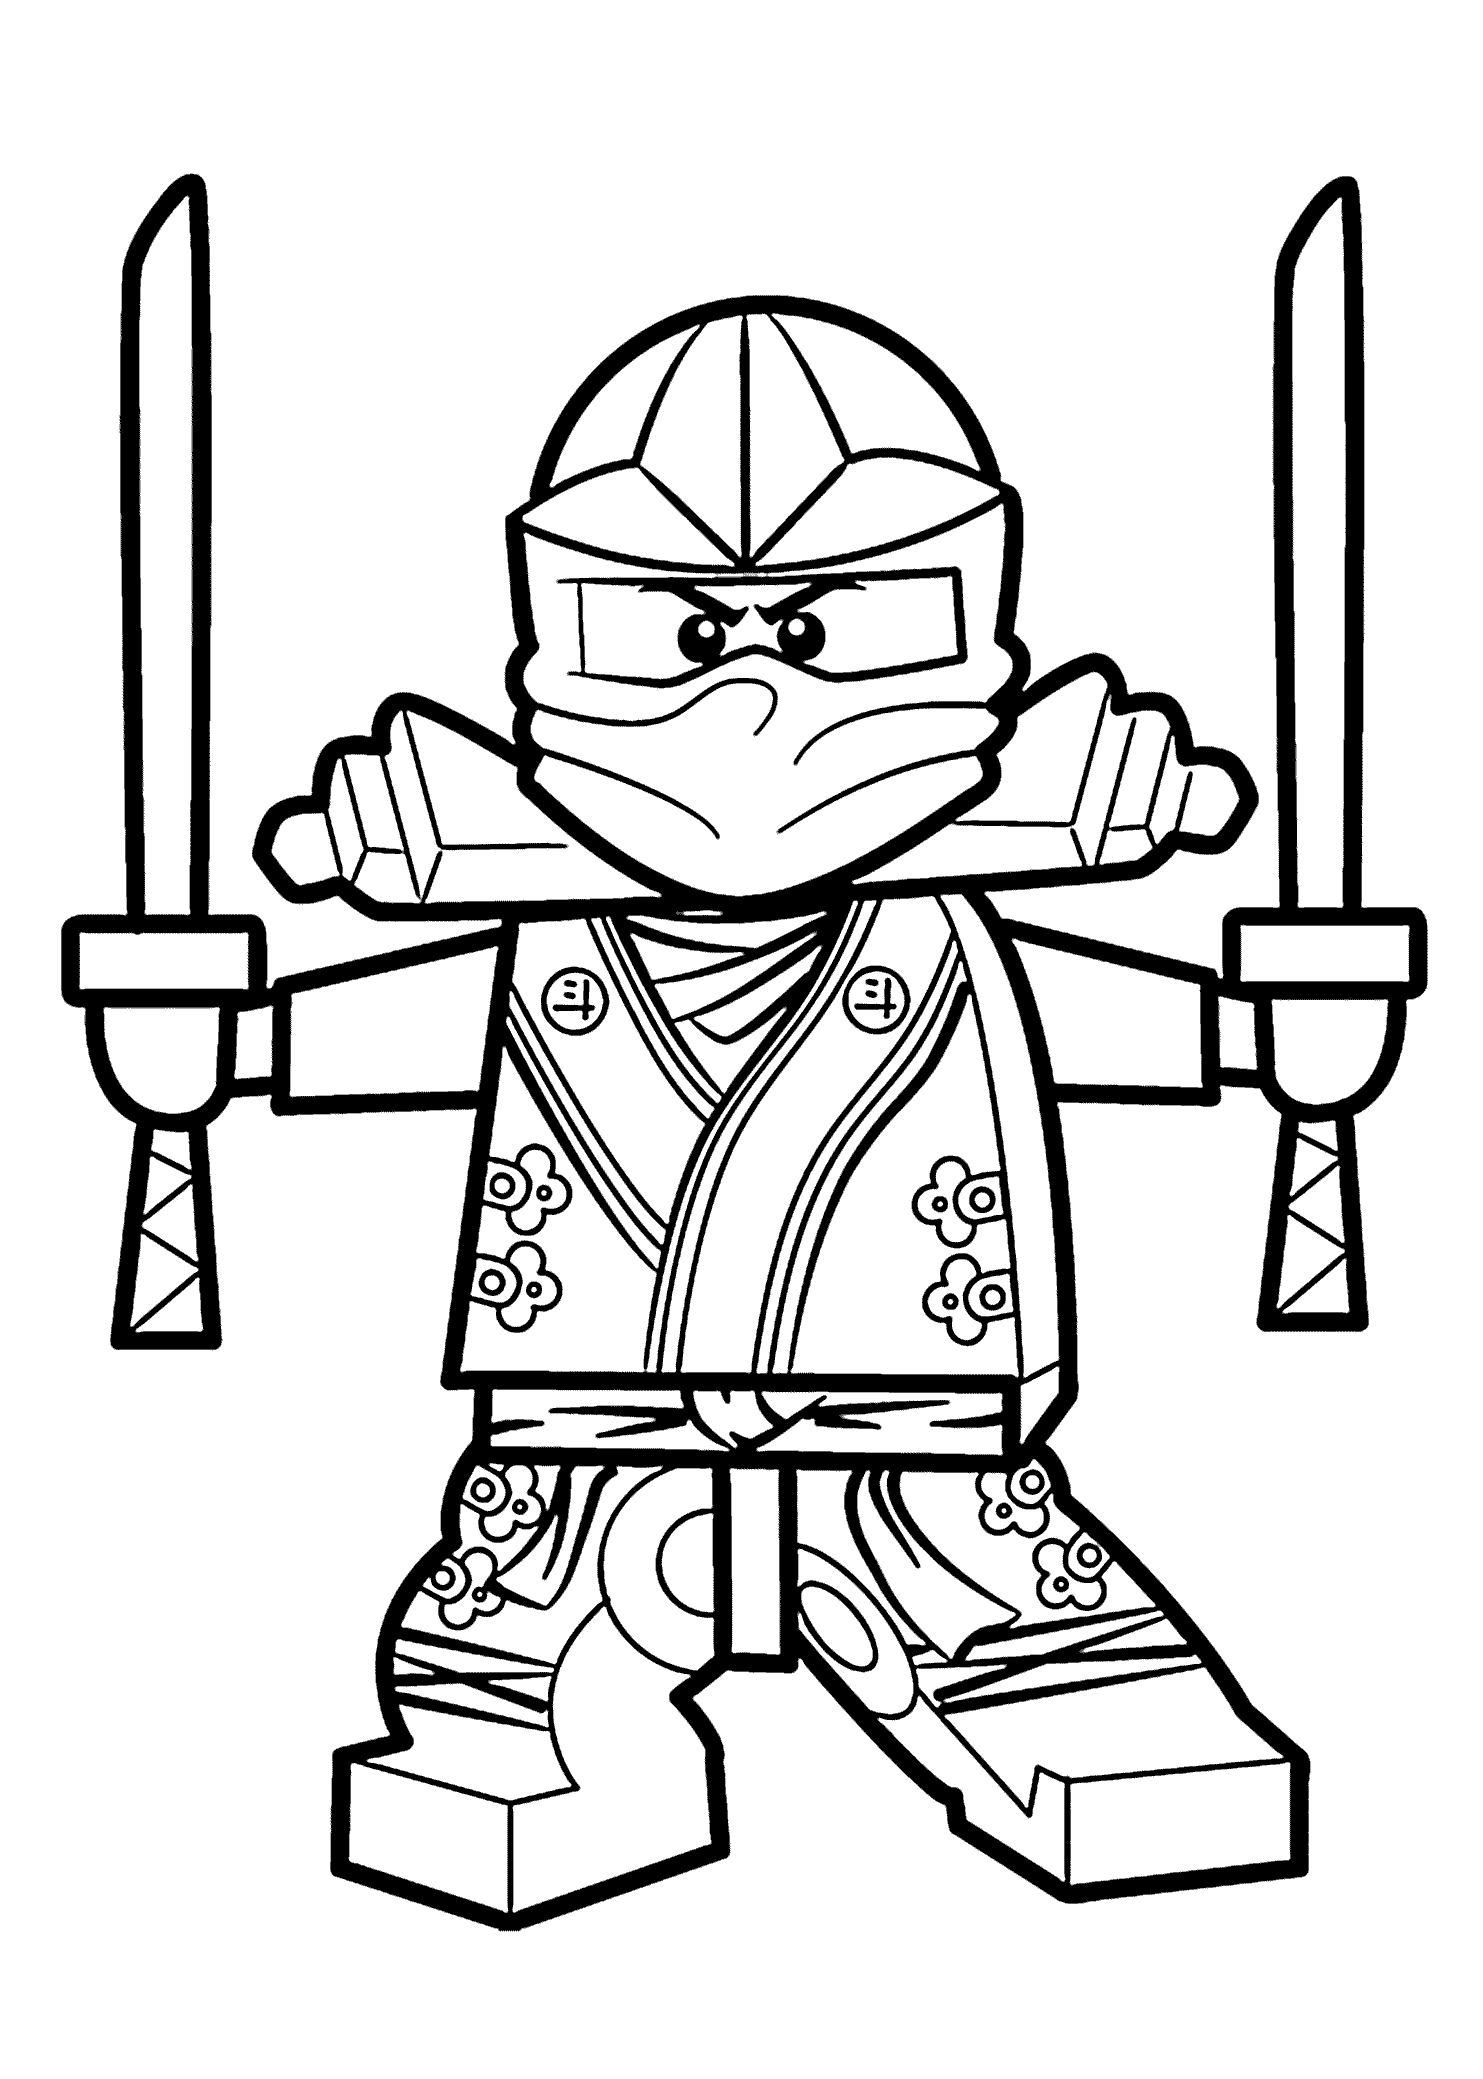 pictures of lego ninjago lego ninjago coloring pages best coloring pages for kids lego ninjago of pictures 